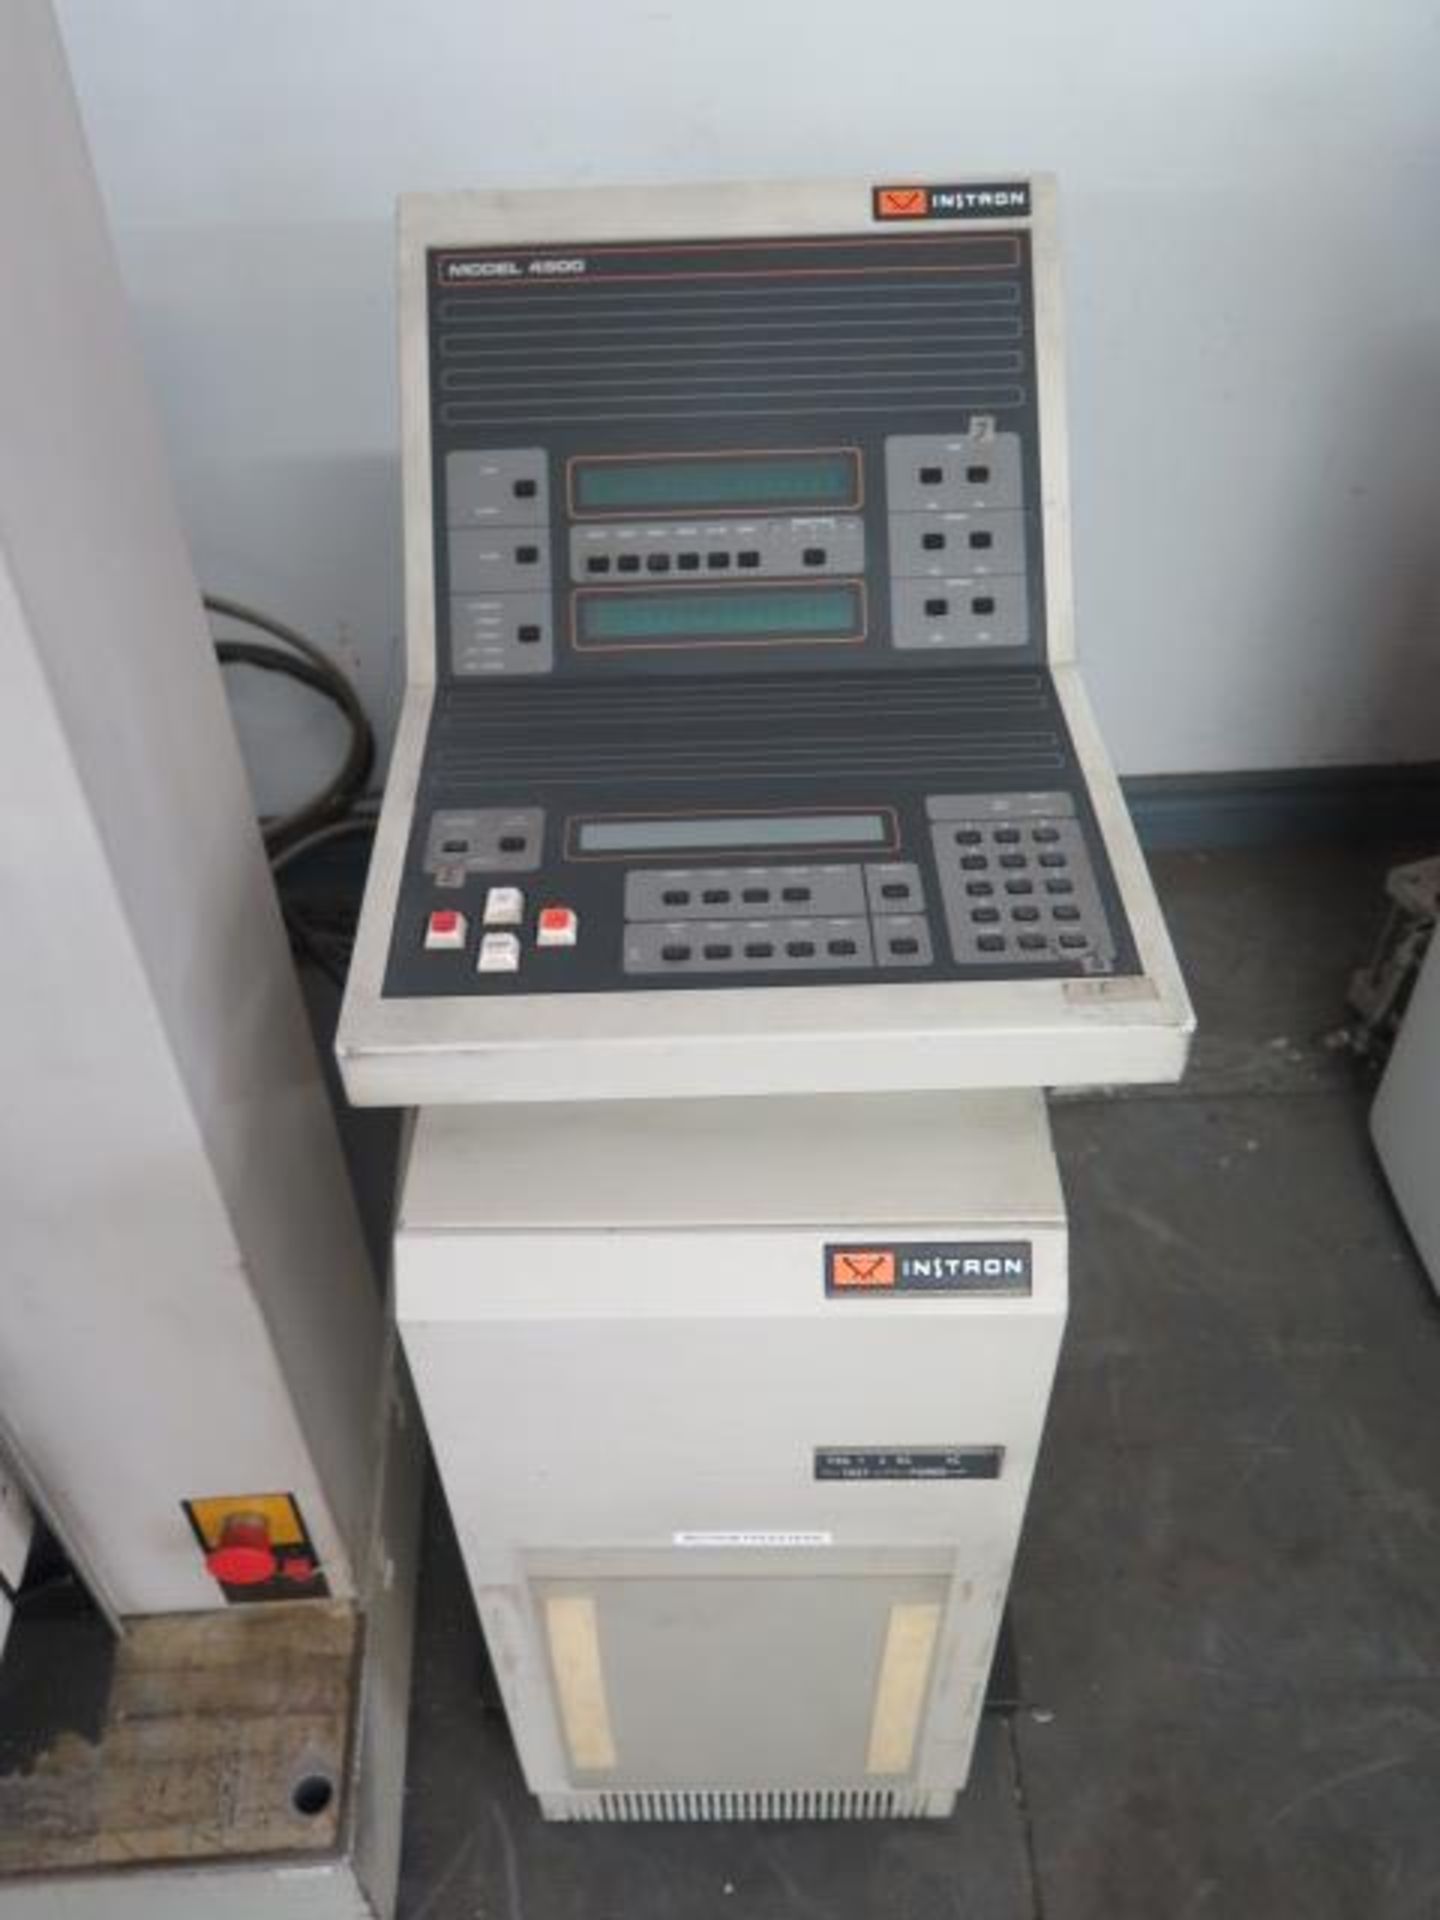 Instron 4501 Tensile Tester s/n H3105 w/ Digital Controls, Heat Wave Test Chamber (Oven) - Image 5 of 8